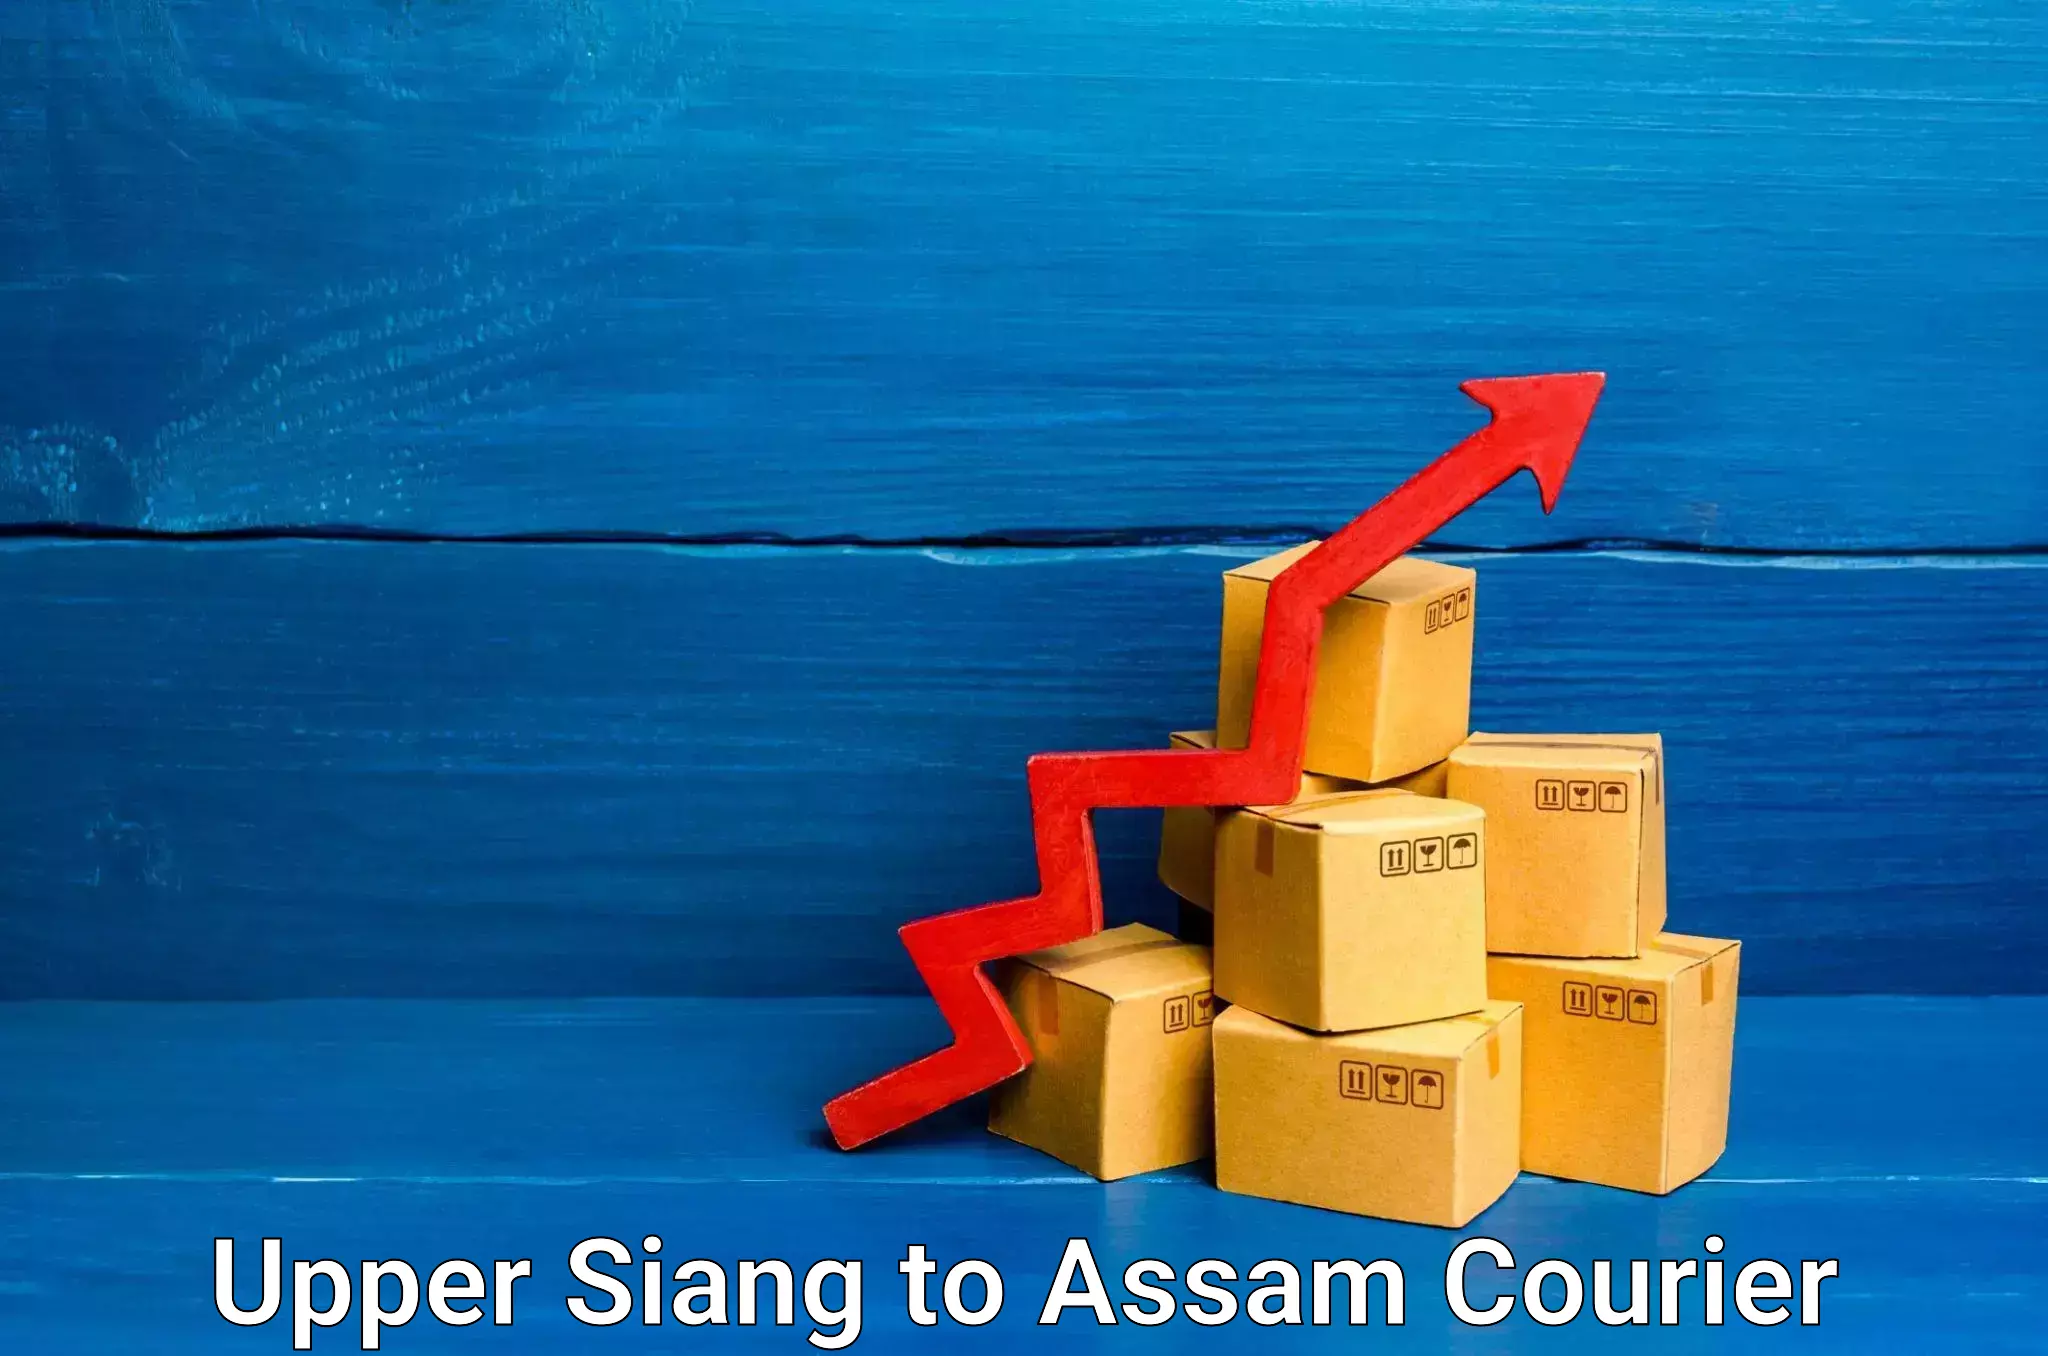 Express mail service in Upper Siang to Baksha Bodoland